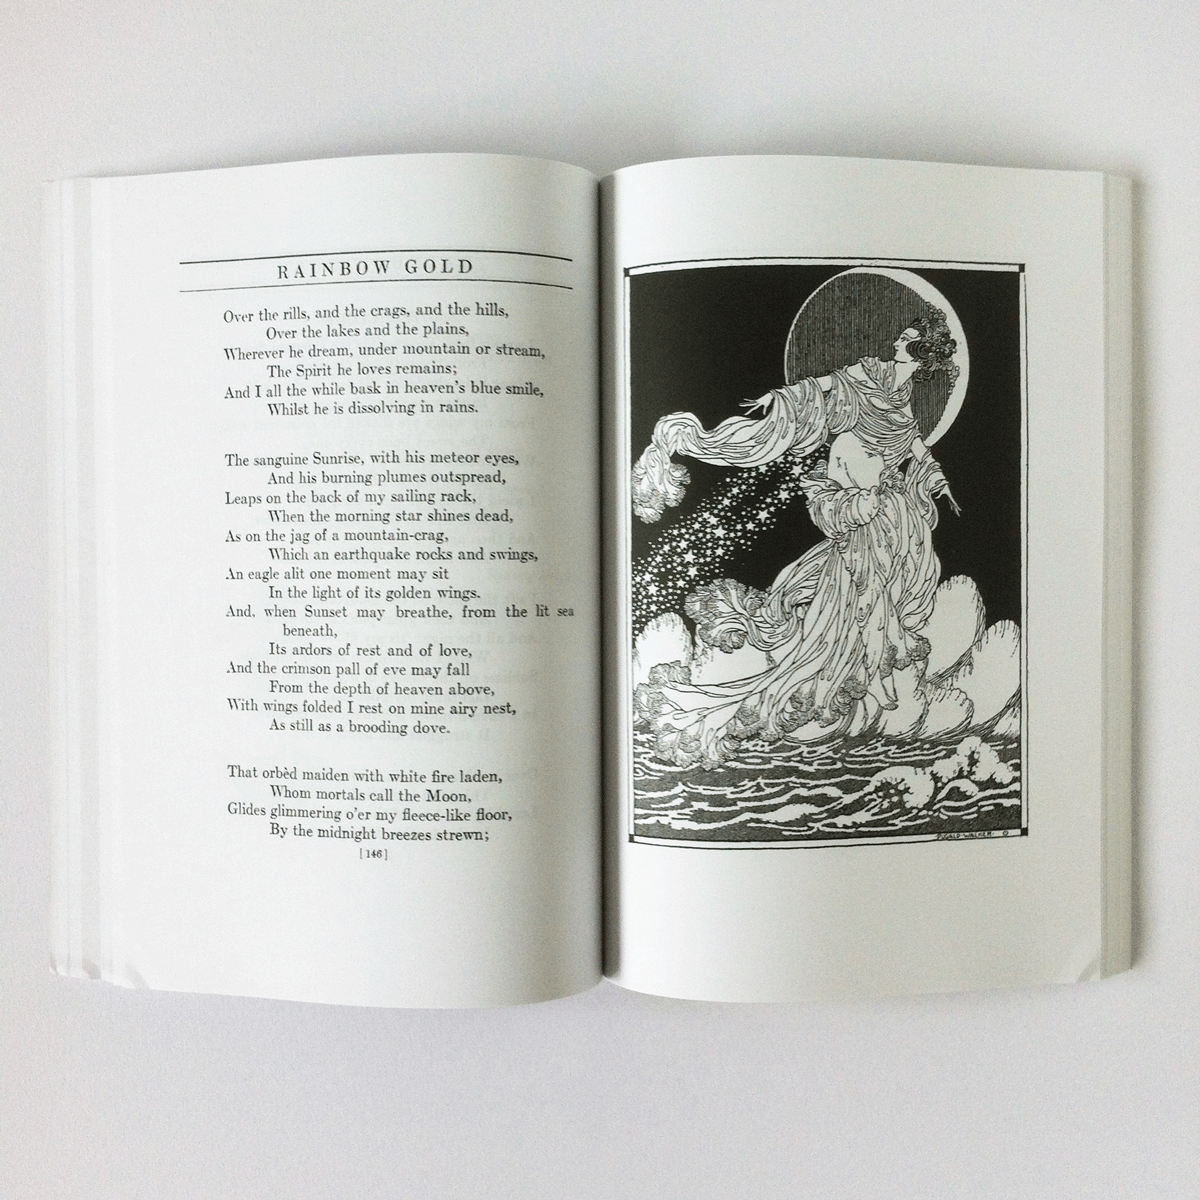 The Cloud , a poem by Percy Bysshe Shelley, illustrated by Dugald Stewart Walker. Rainbow Gold Book.